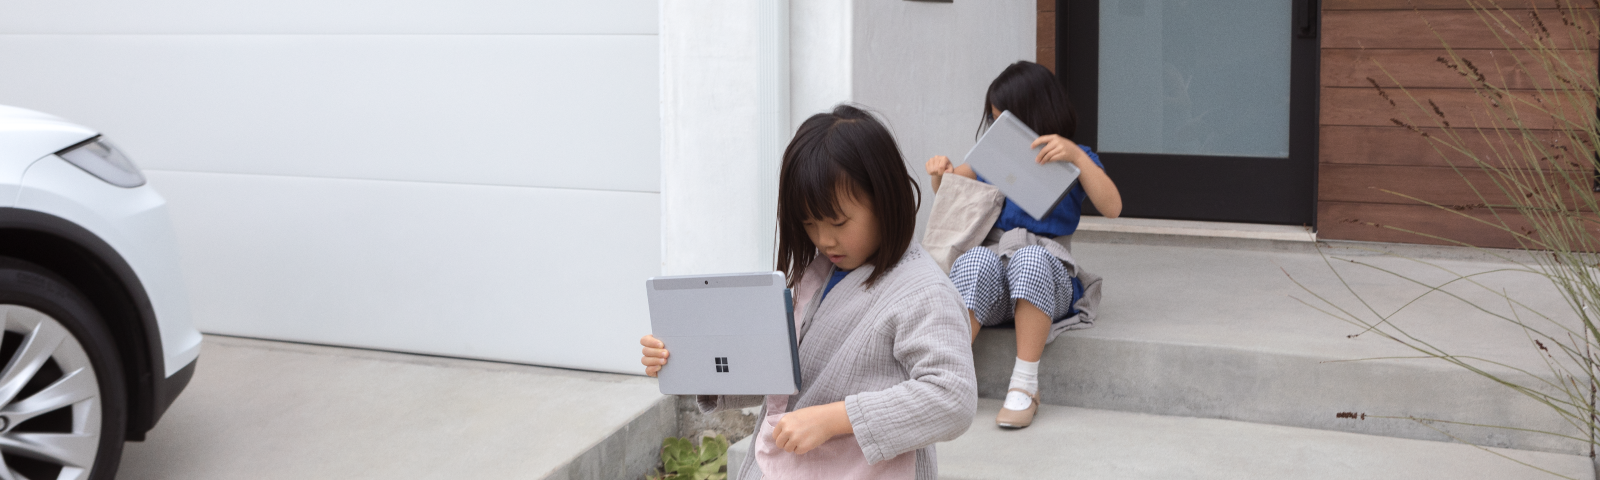 Kids using Surface products